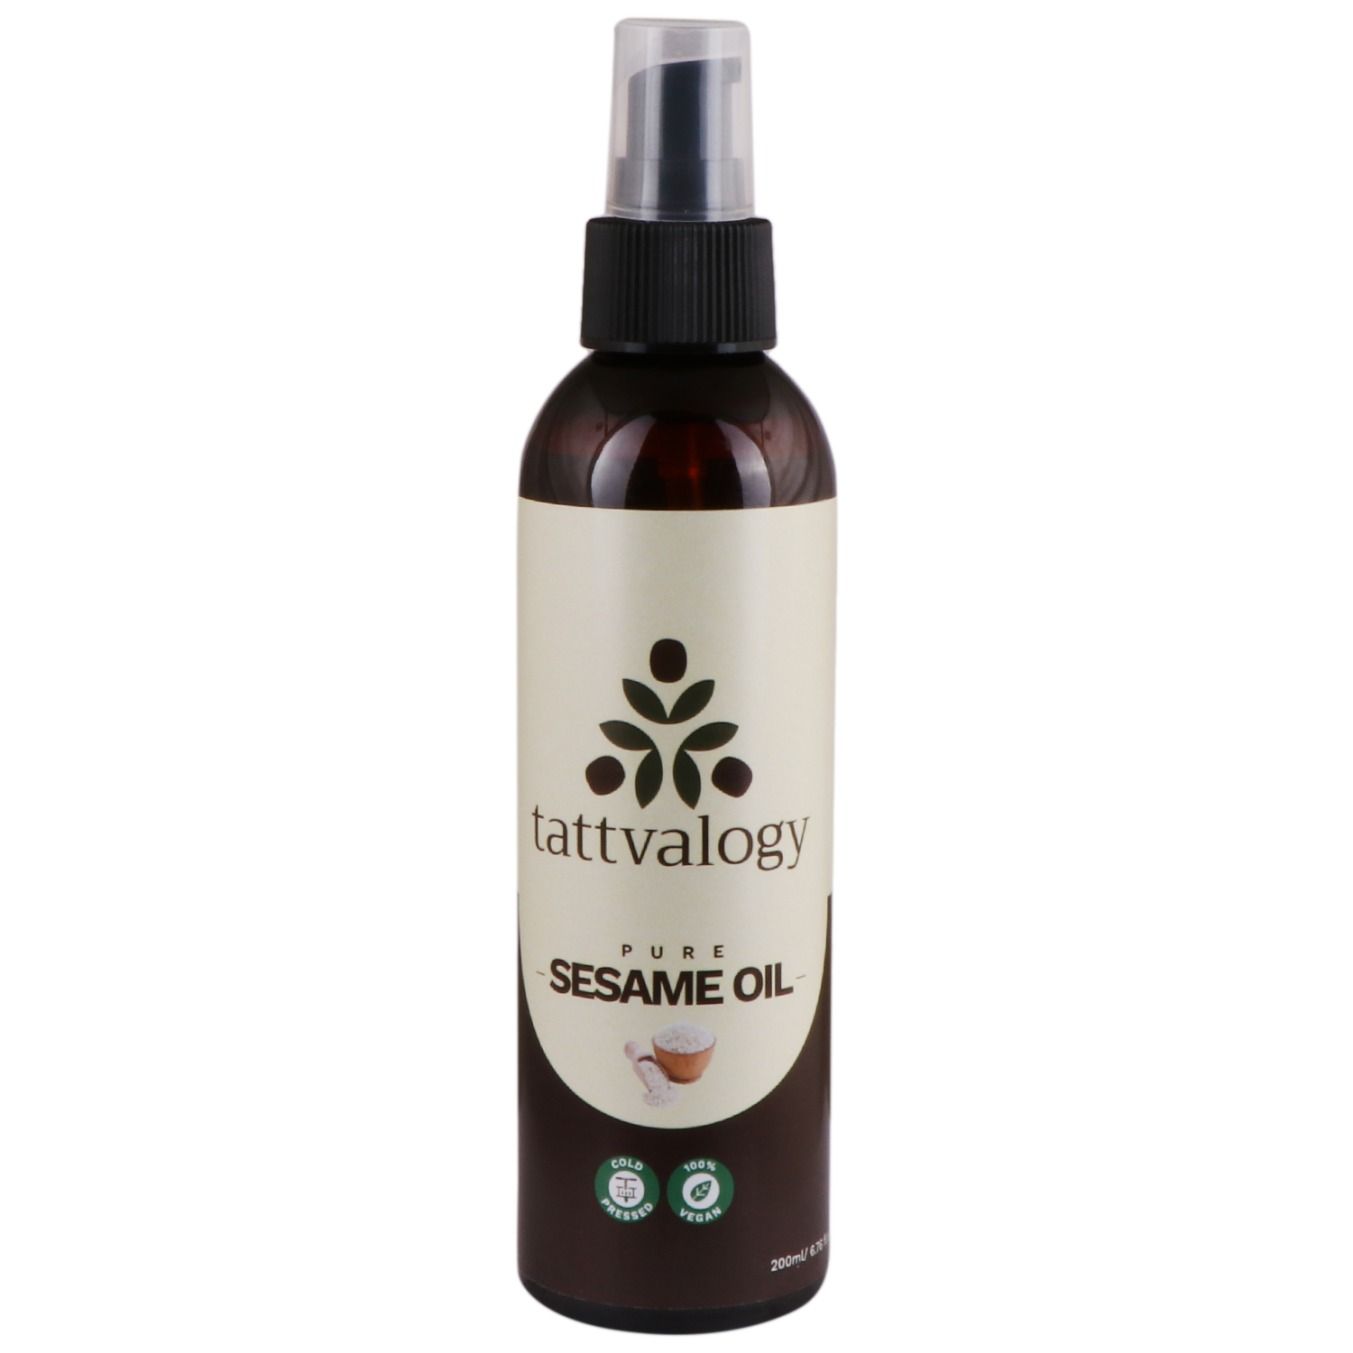 Tattvalogy Sesame Oil, Pure, Natural & Cold Pressed Oil for Skin and Hair Nourishing